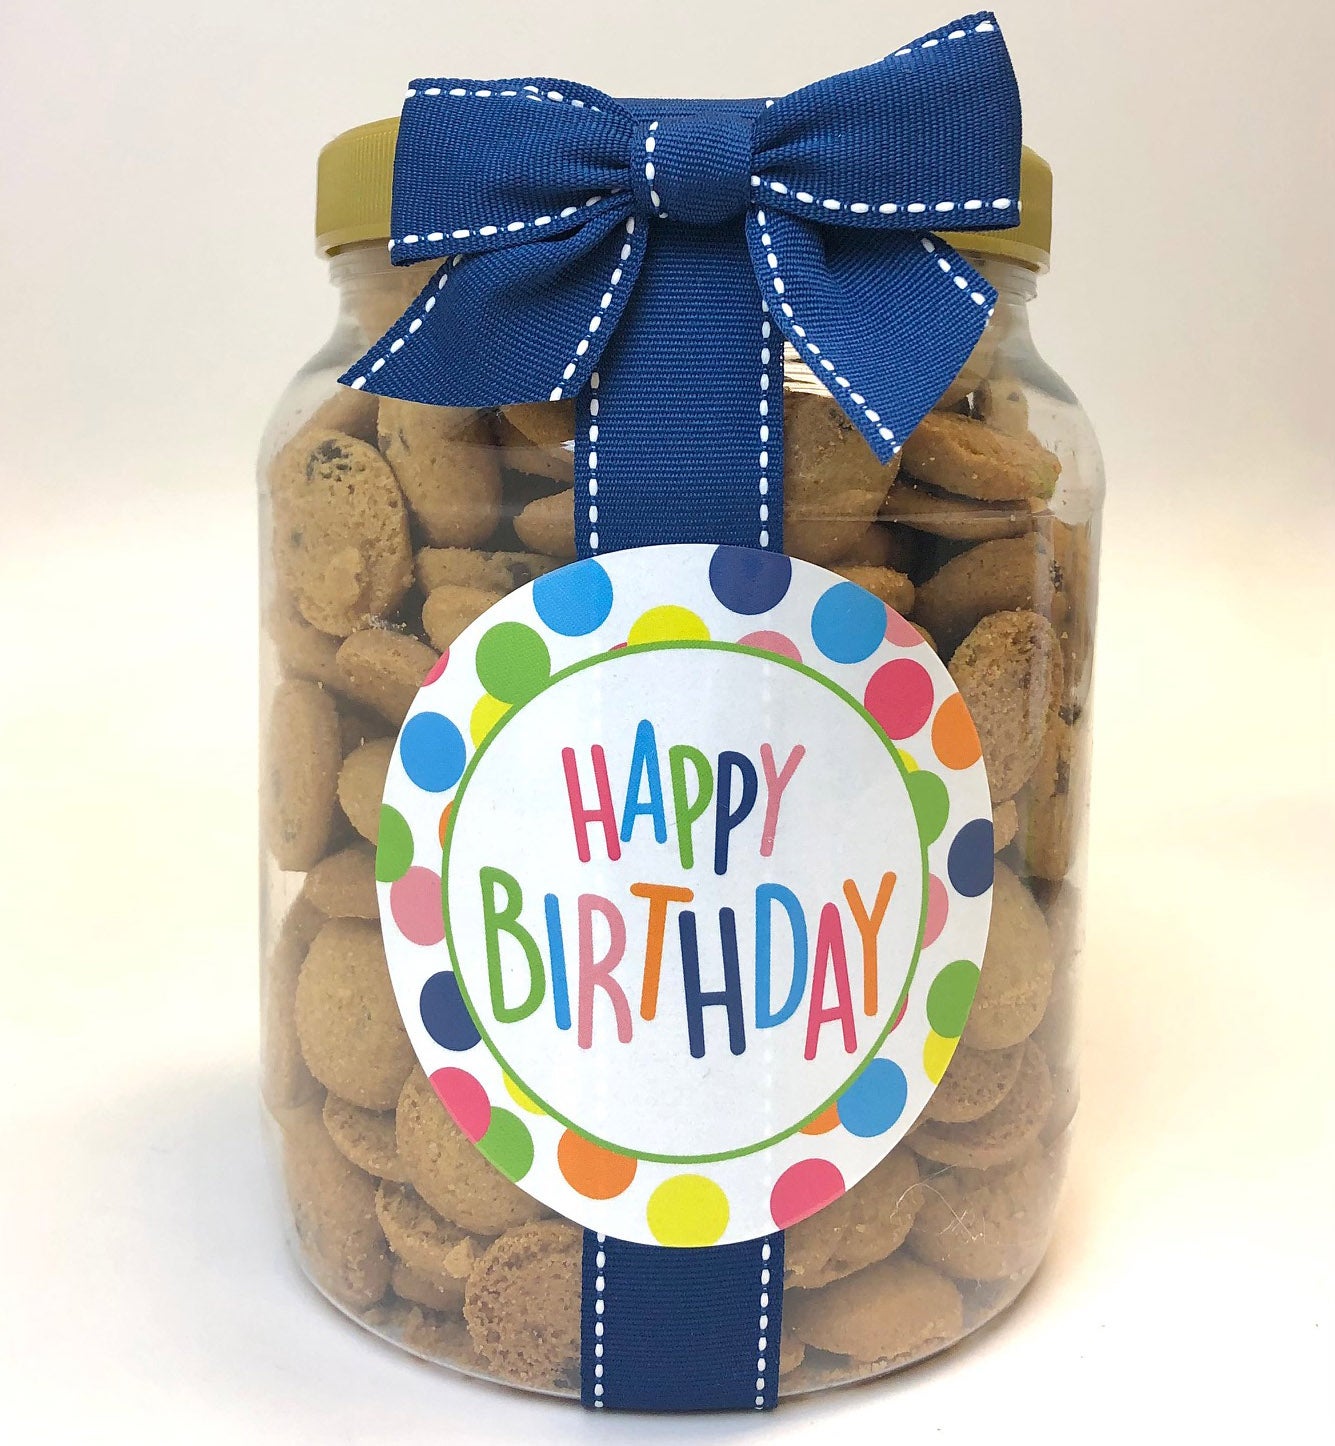 It's Your Birthday! Chocolate Chip Cookie Jar